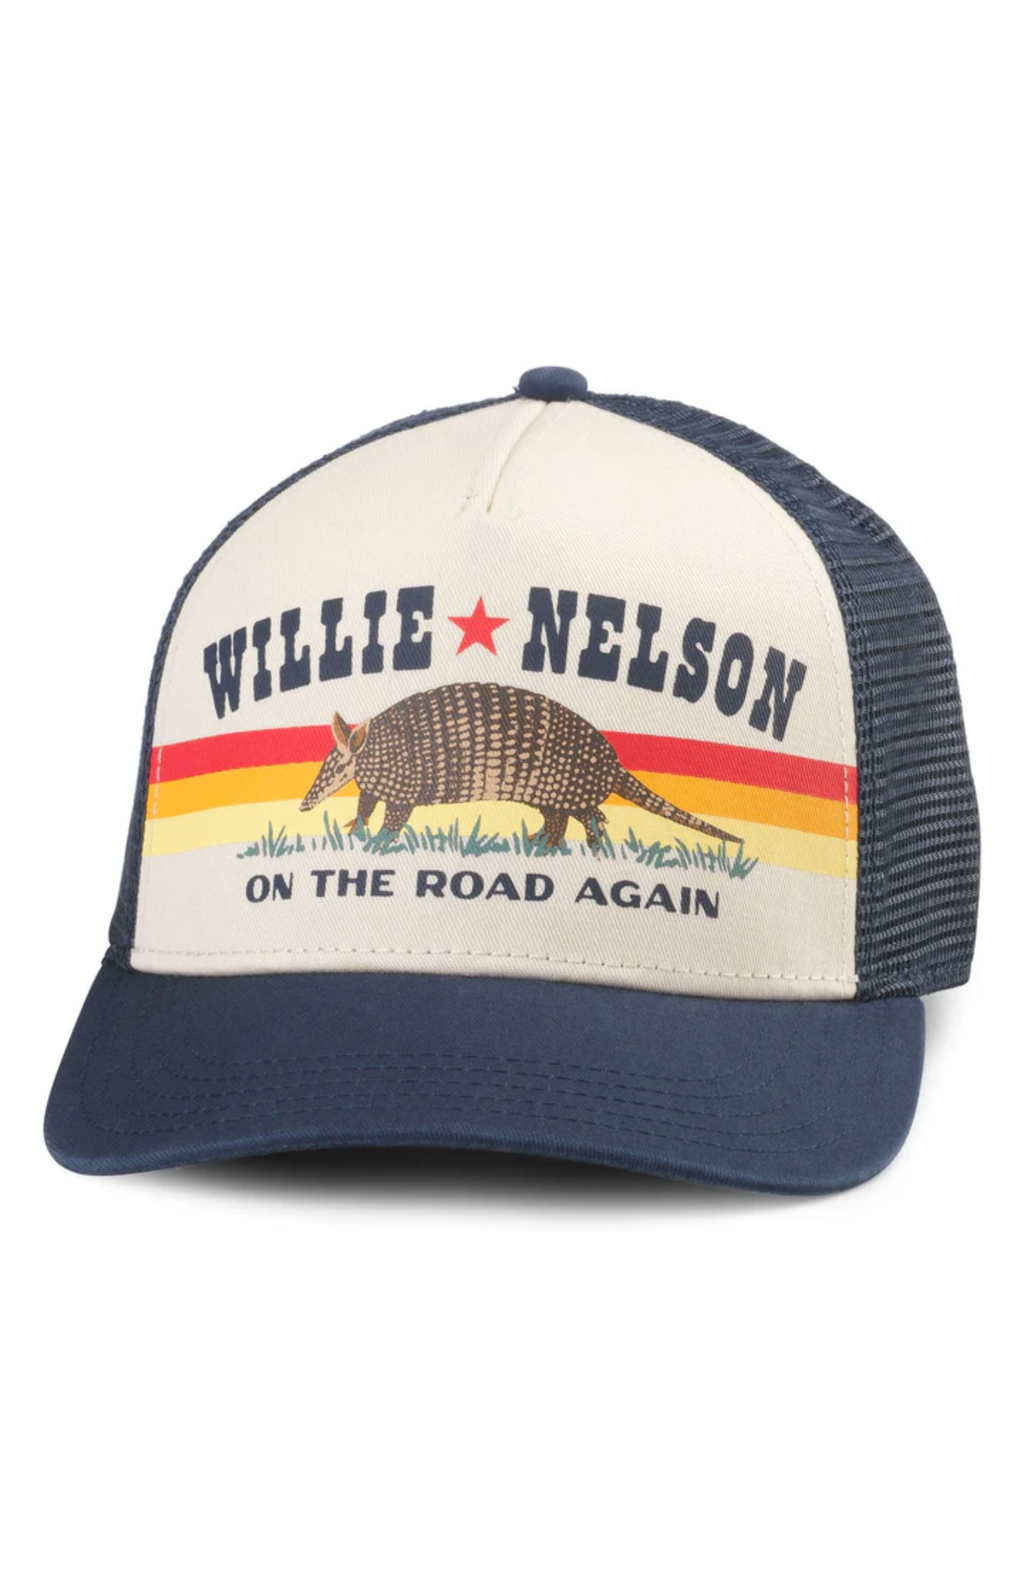 American Needle - Sinclair Willie Nelson